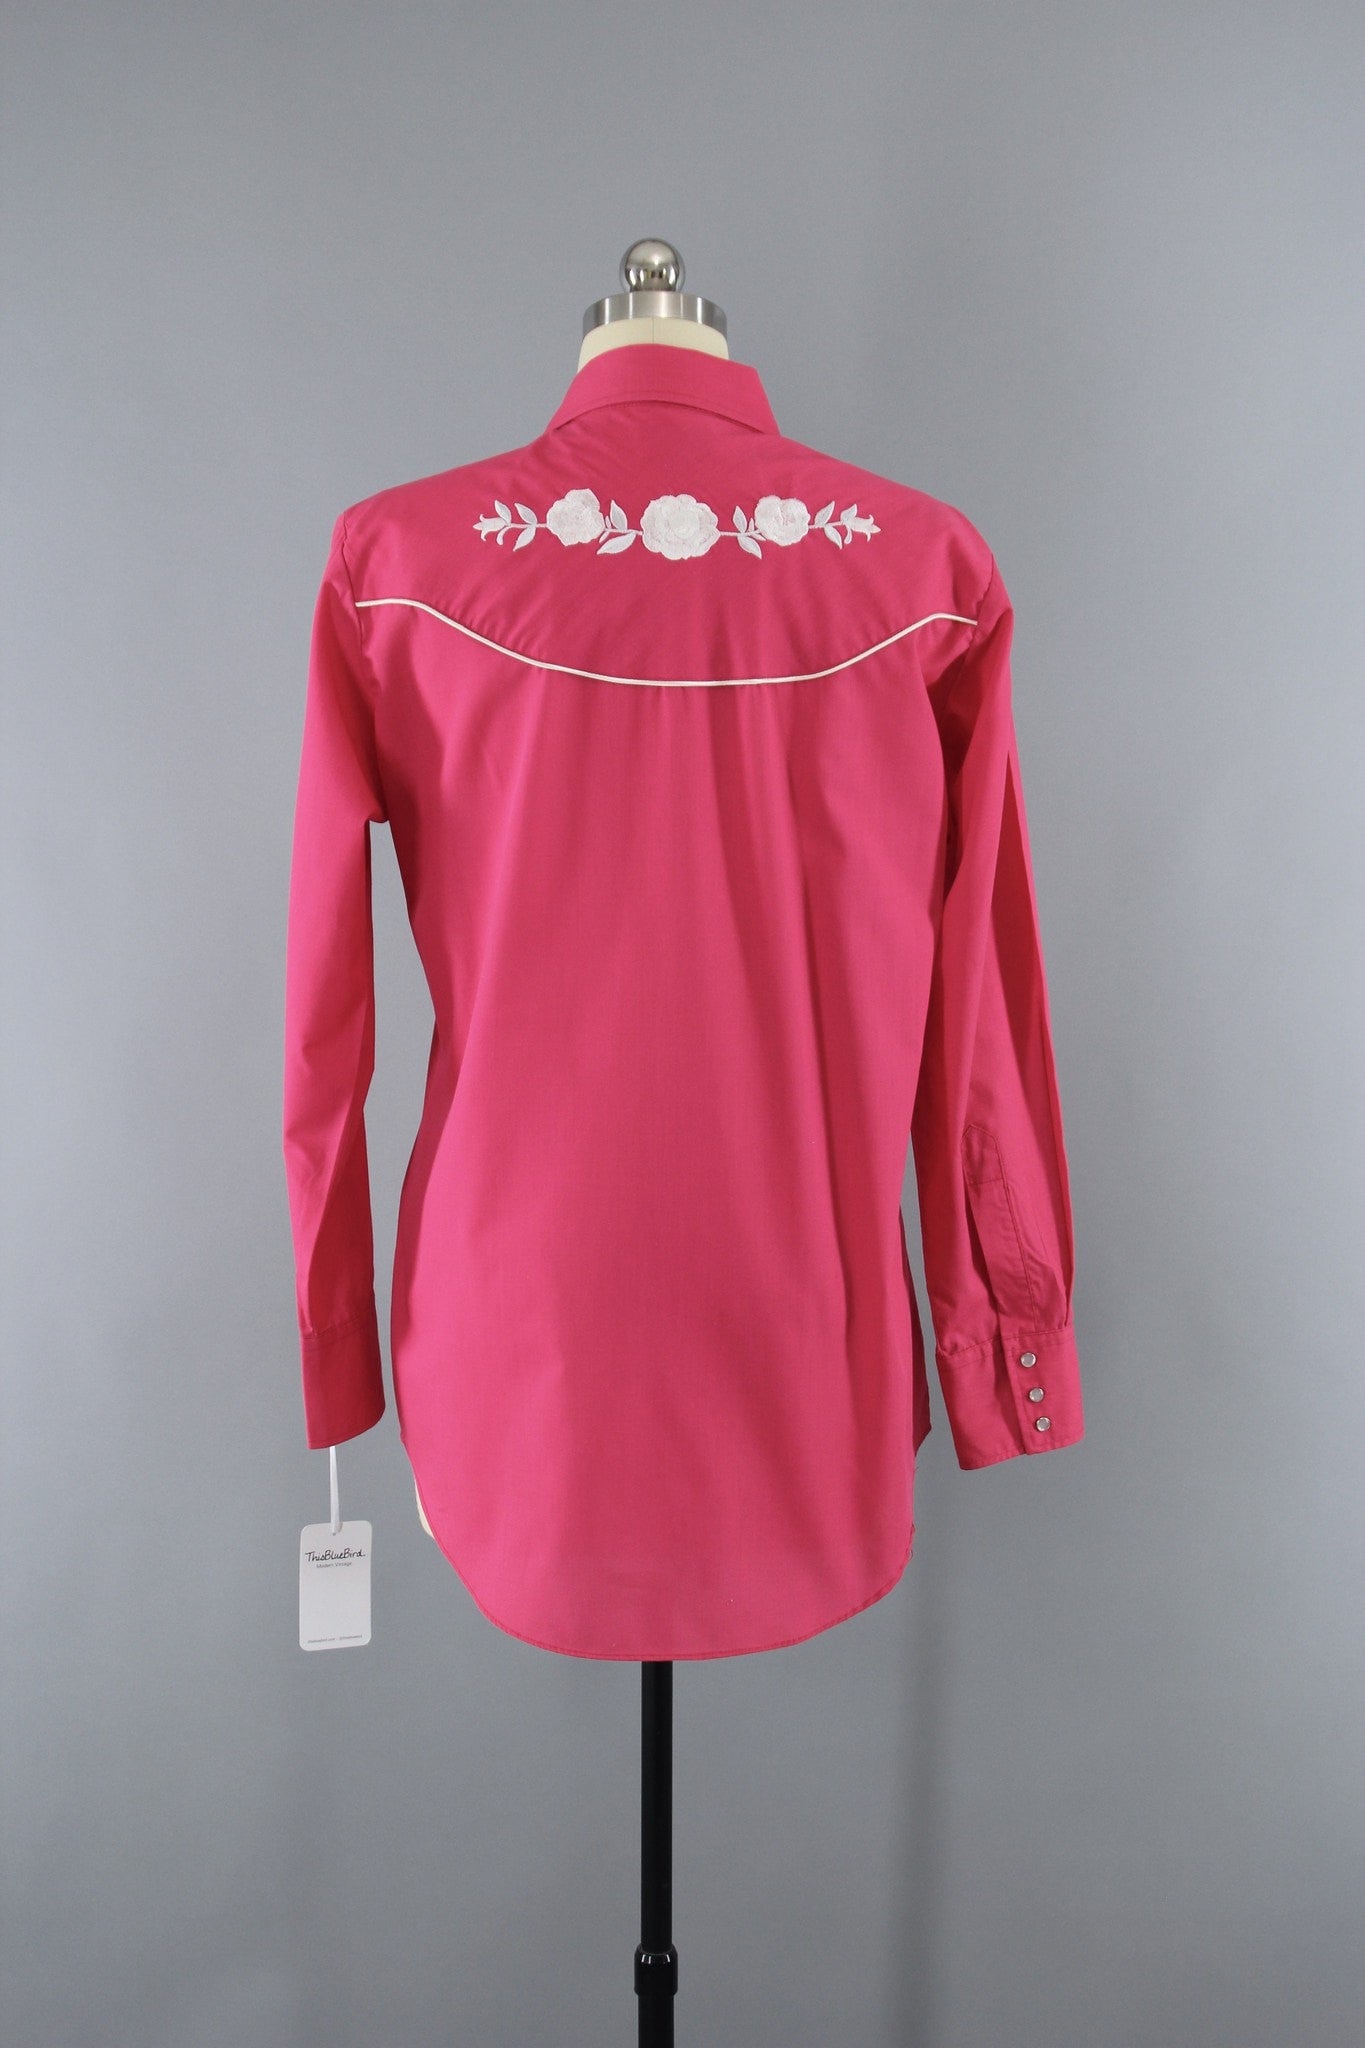 Vintage 1980s ELY Pink Embroidered Western Shirt - ThisBlueBird